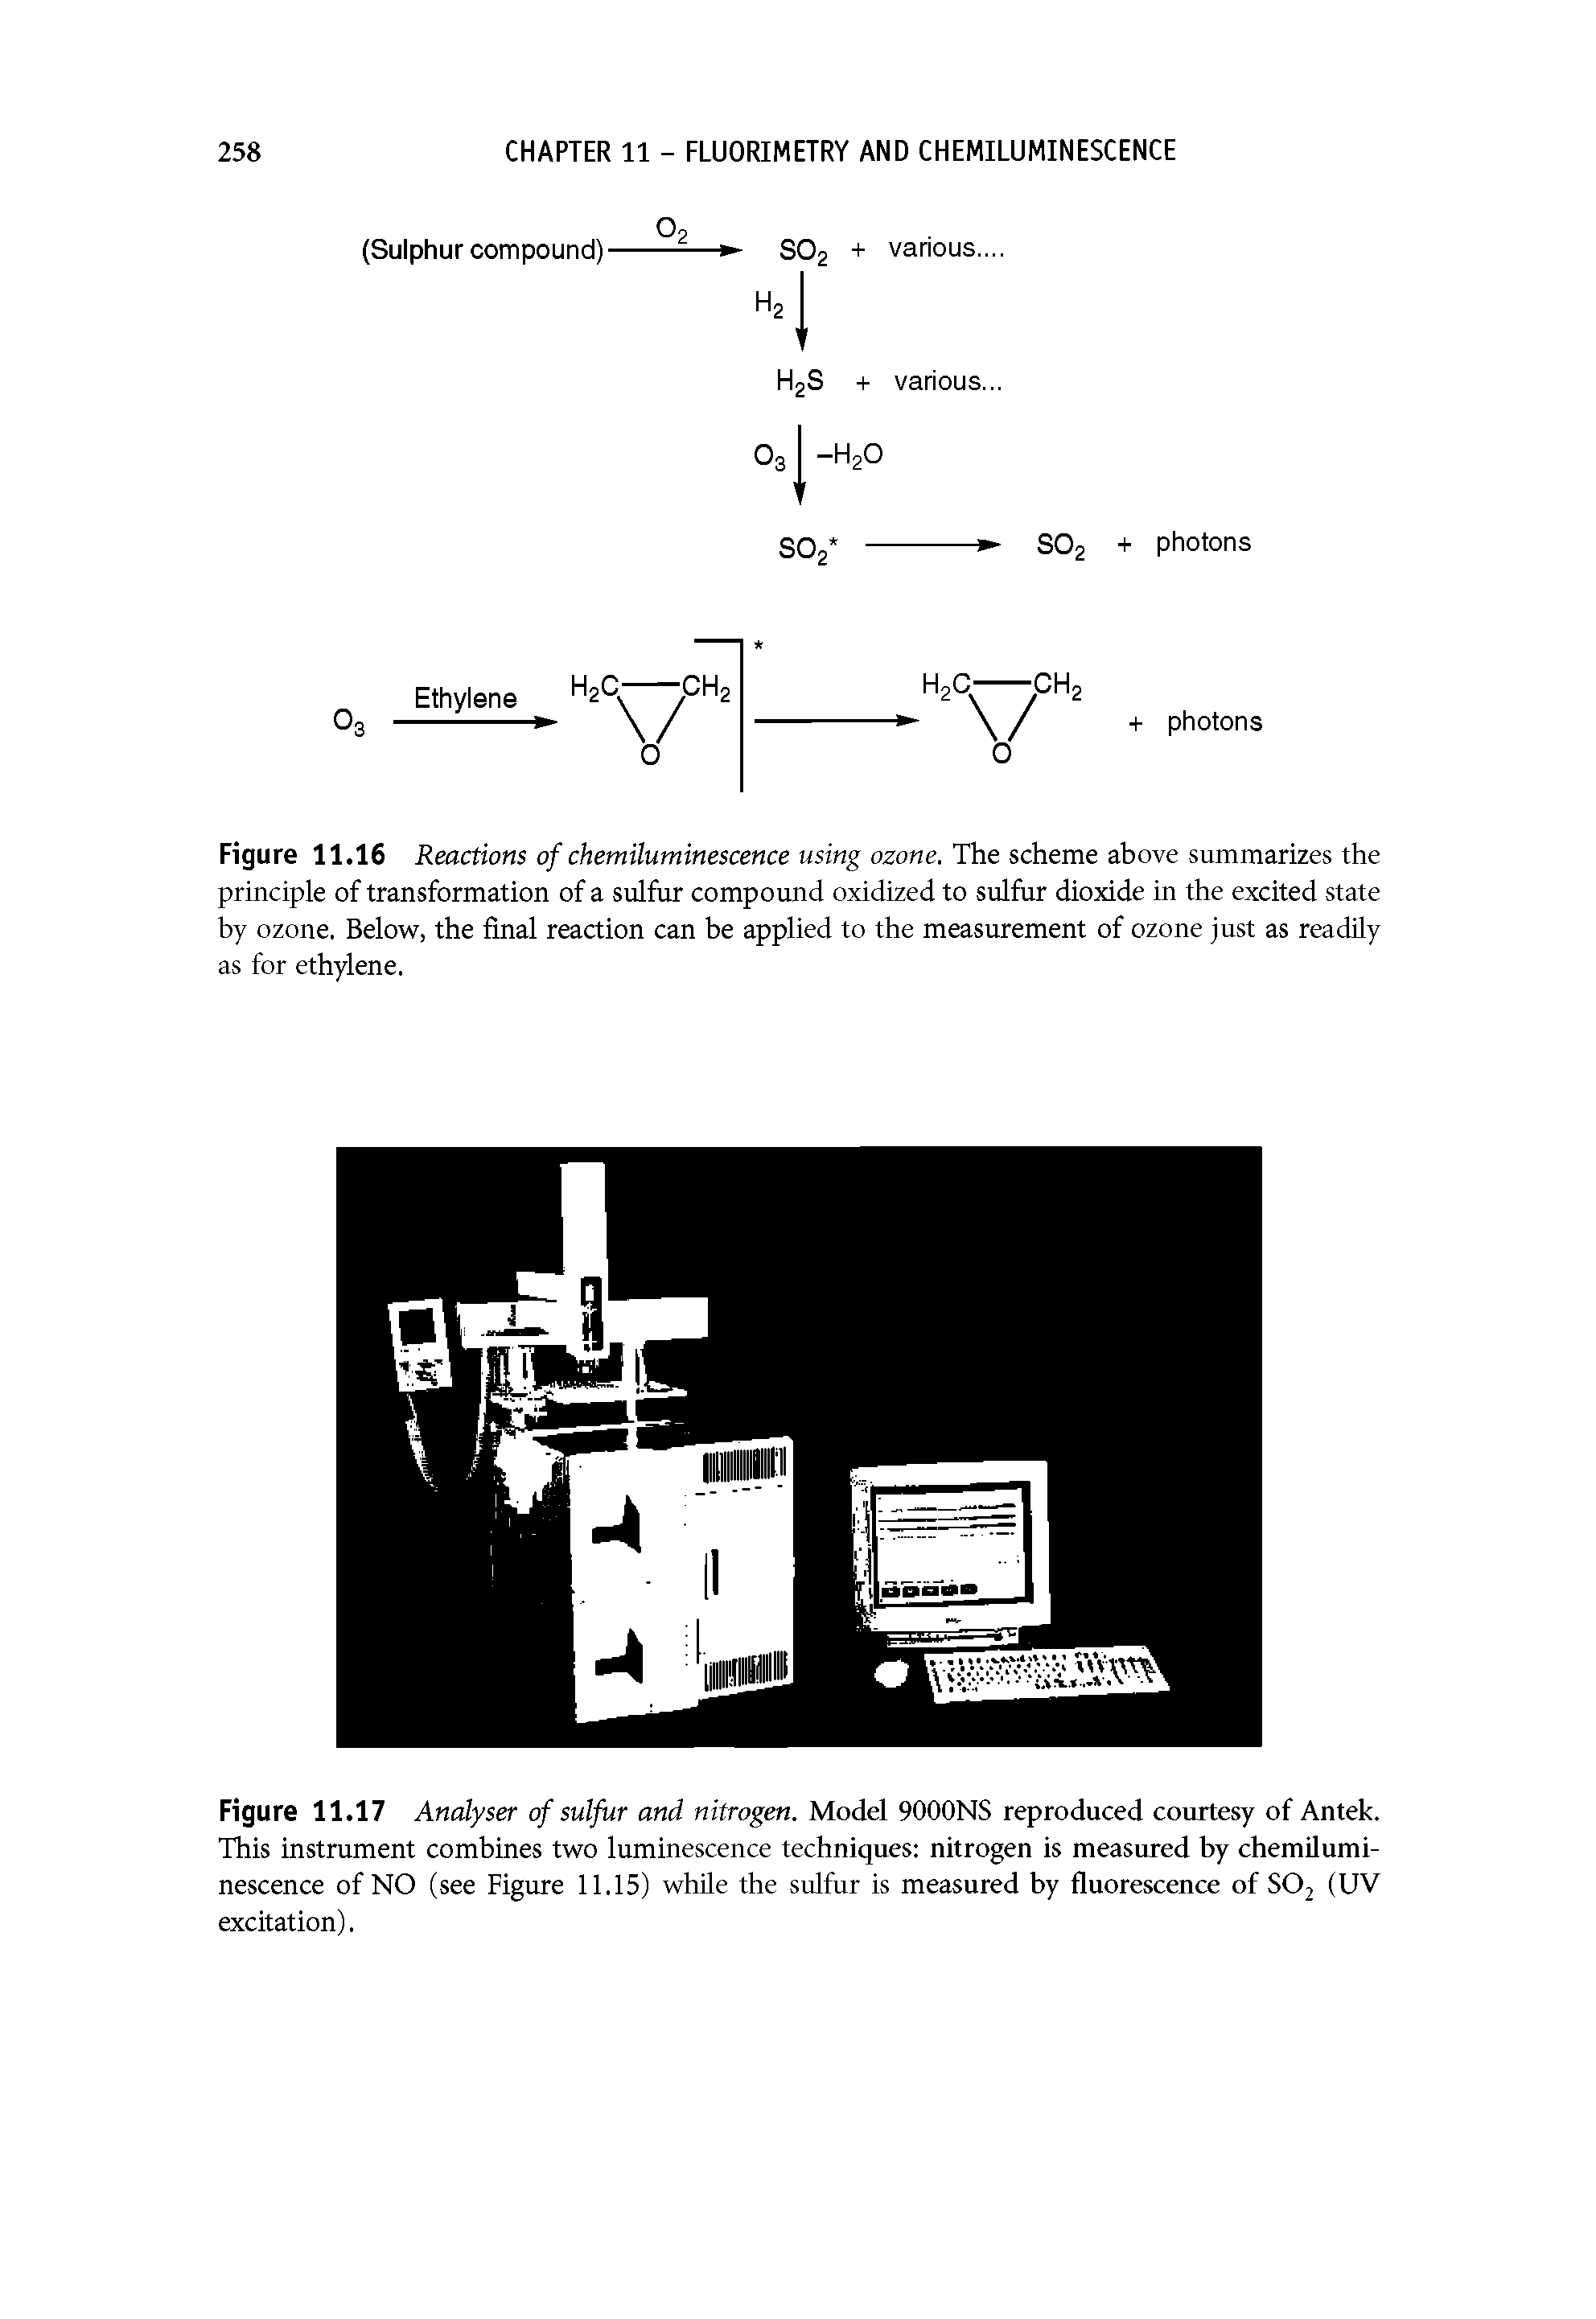 Figure 11.17 Analyser of sulfur and nitrogen. Model 9000NS reproduced courtesy of Antek. This instrument combines two luminescence techniques nitrogen is measured by chemiluminescence of NO (see Figure 11.15) while the sulfur is measured by fluorescence of SOj (UV excitation).